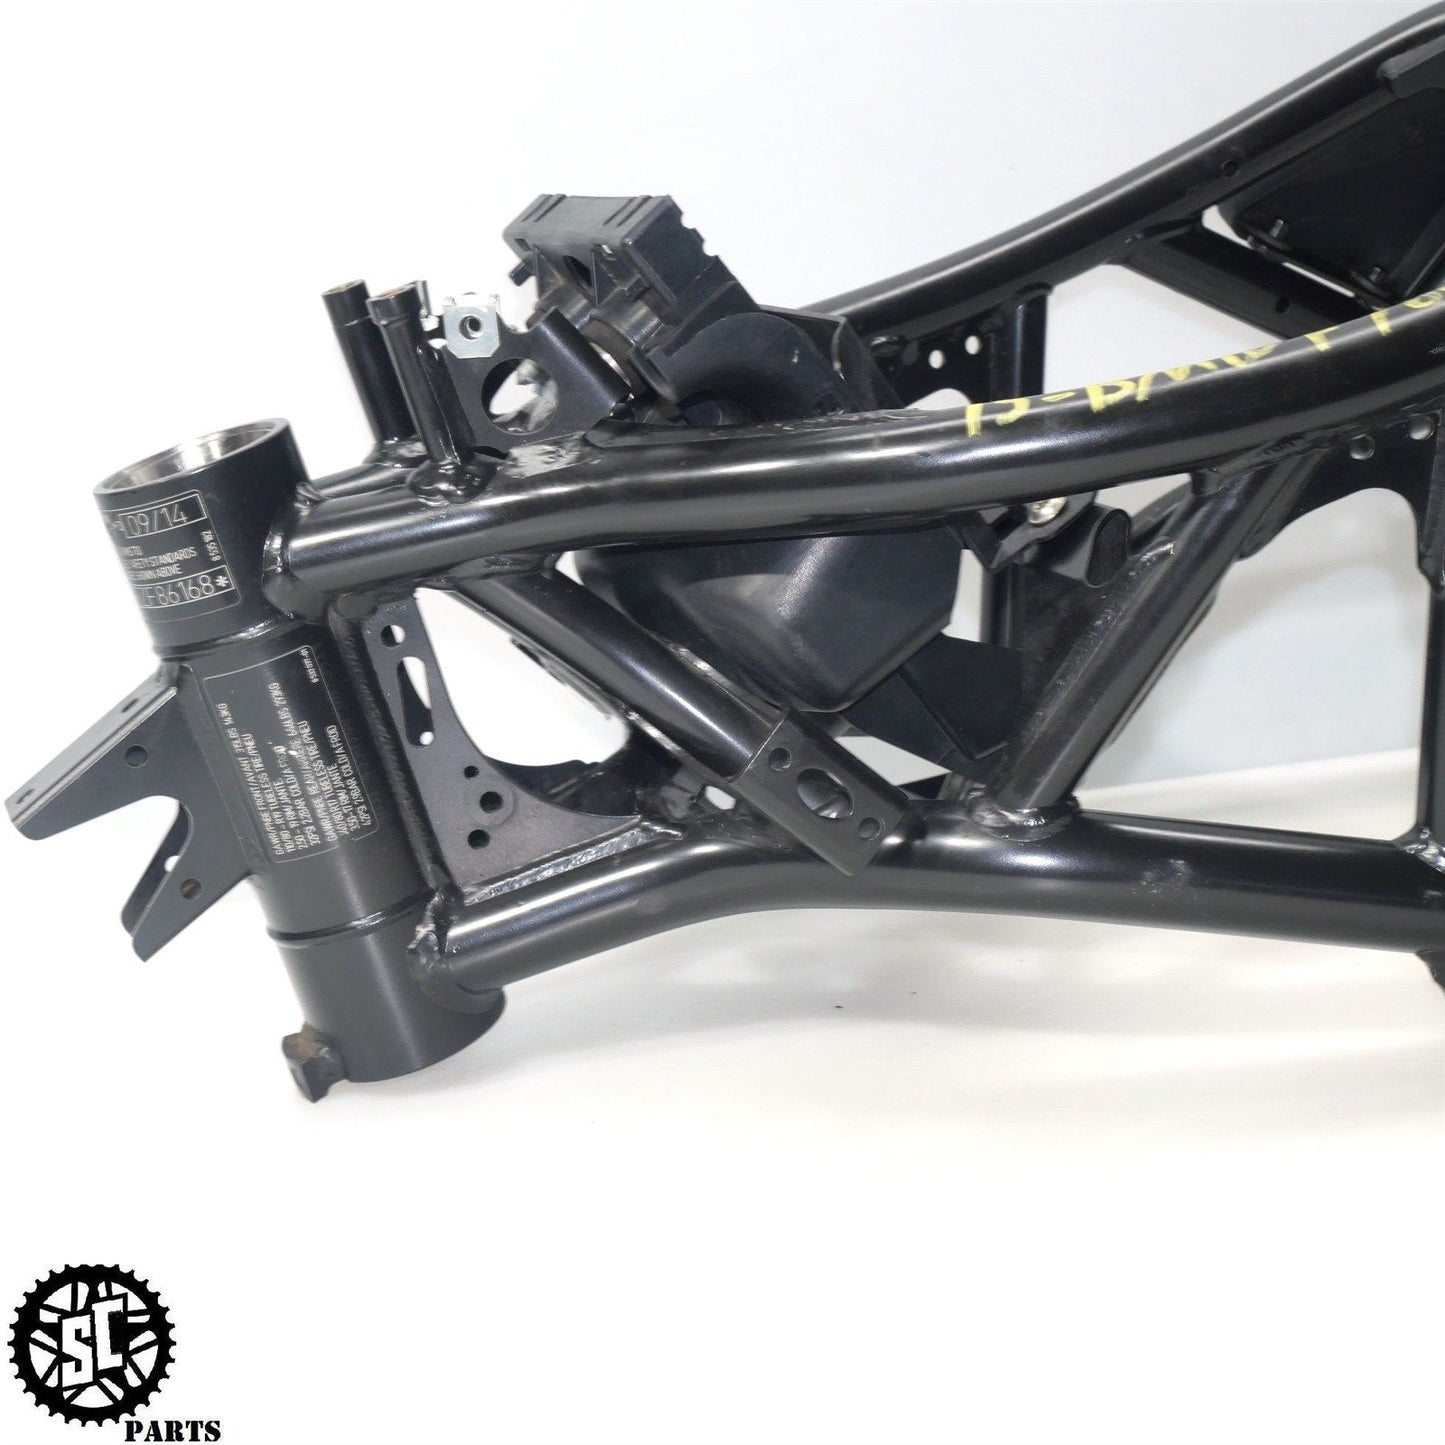 2013-2018 BMW F700GS MAIN FRAME CHASSIS BOS B27